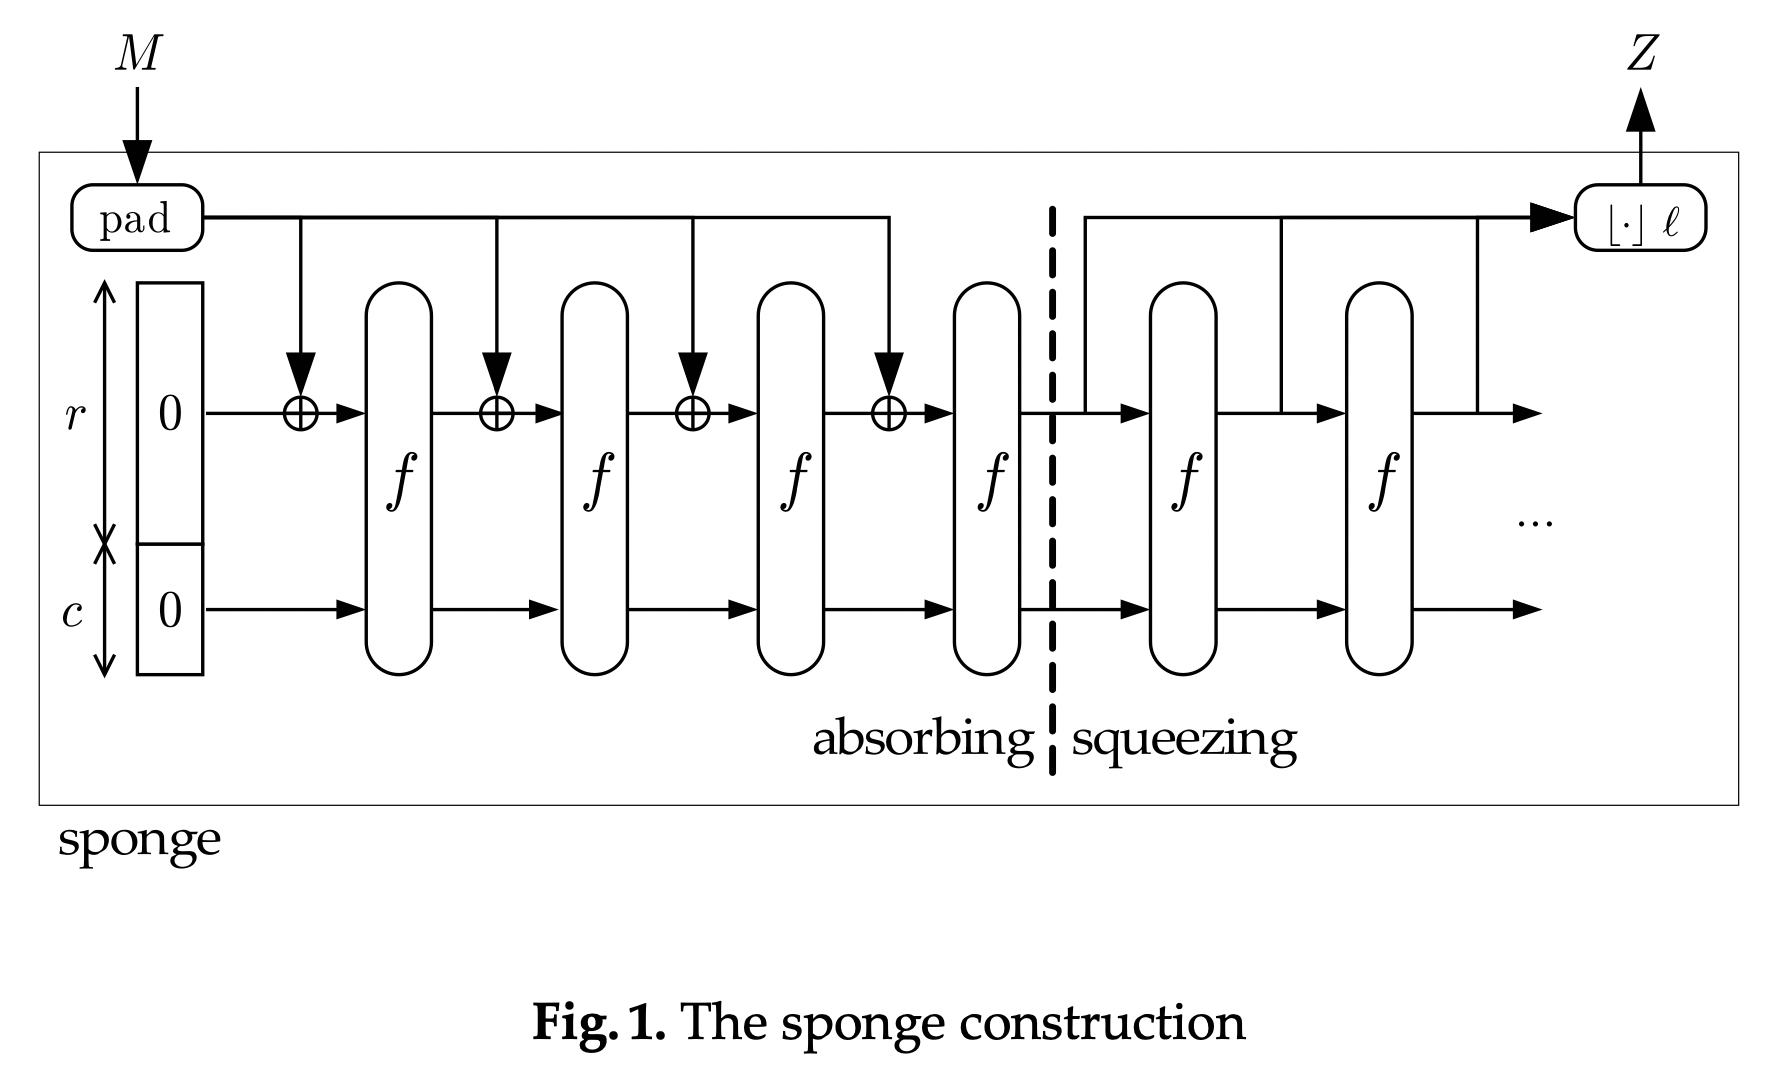 A visualization of the sponge construction